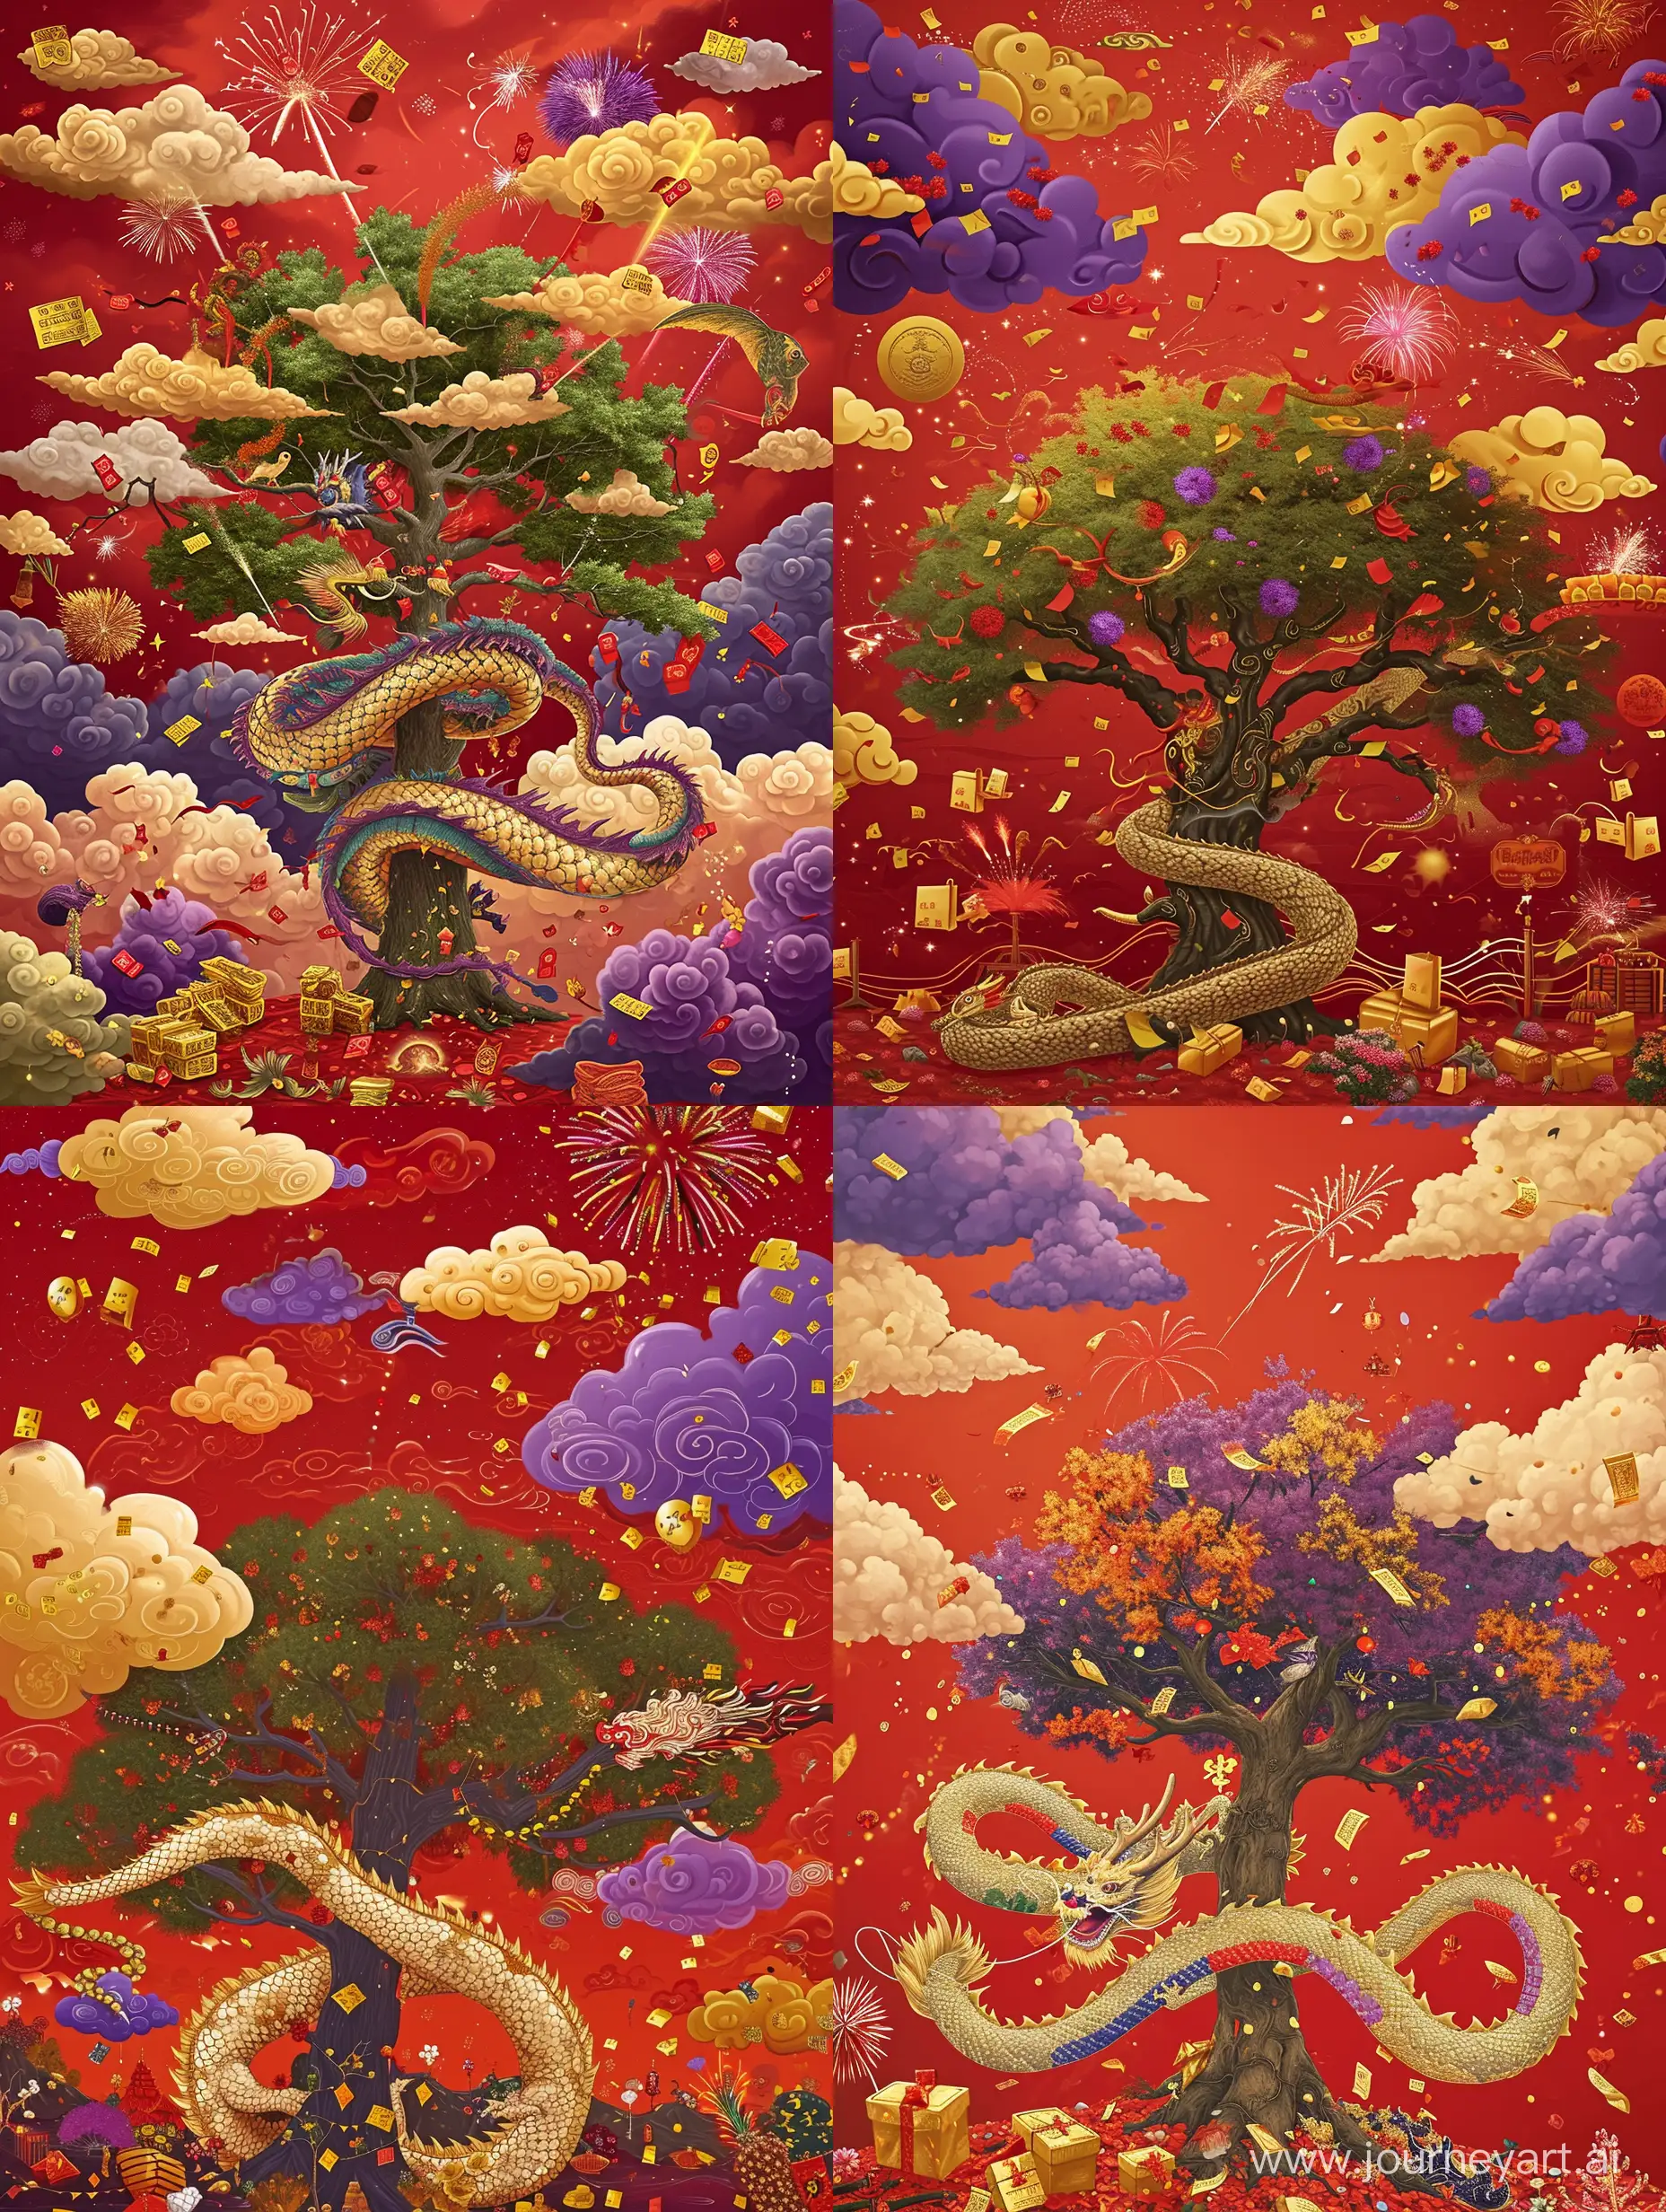 Auspicious-Dragon-Embracing-Tree-in-Vibrant-Chinese-New-Year-Scene